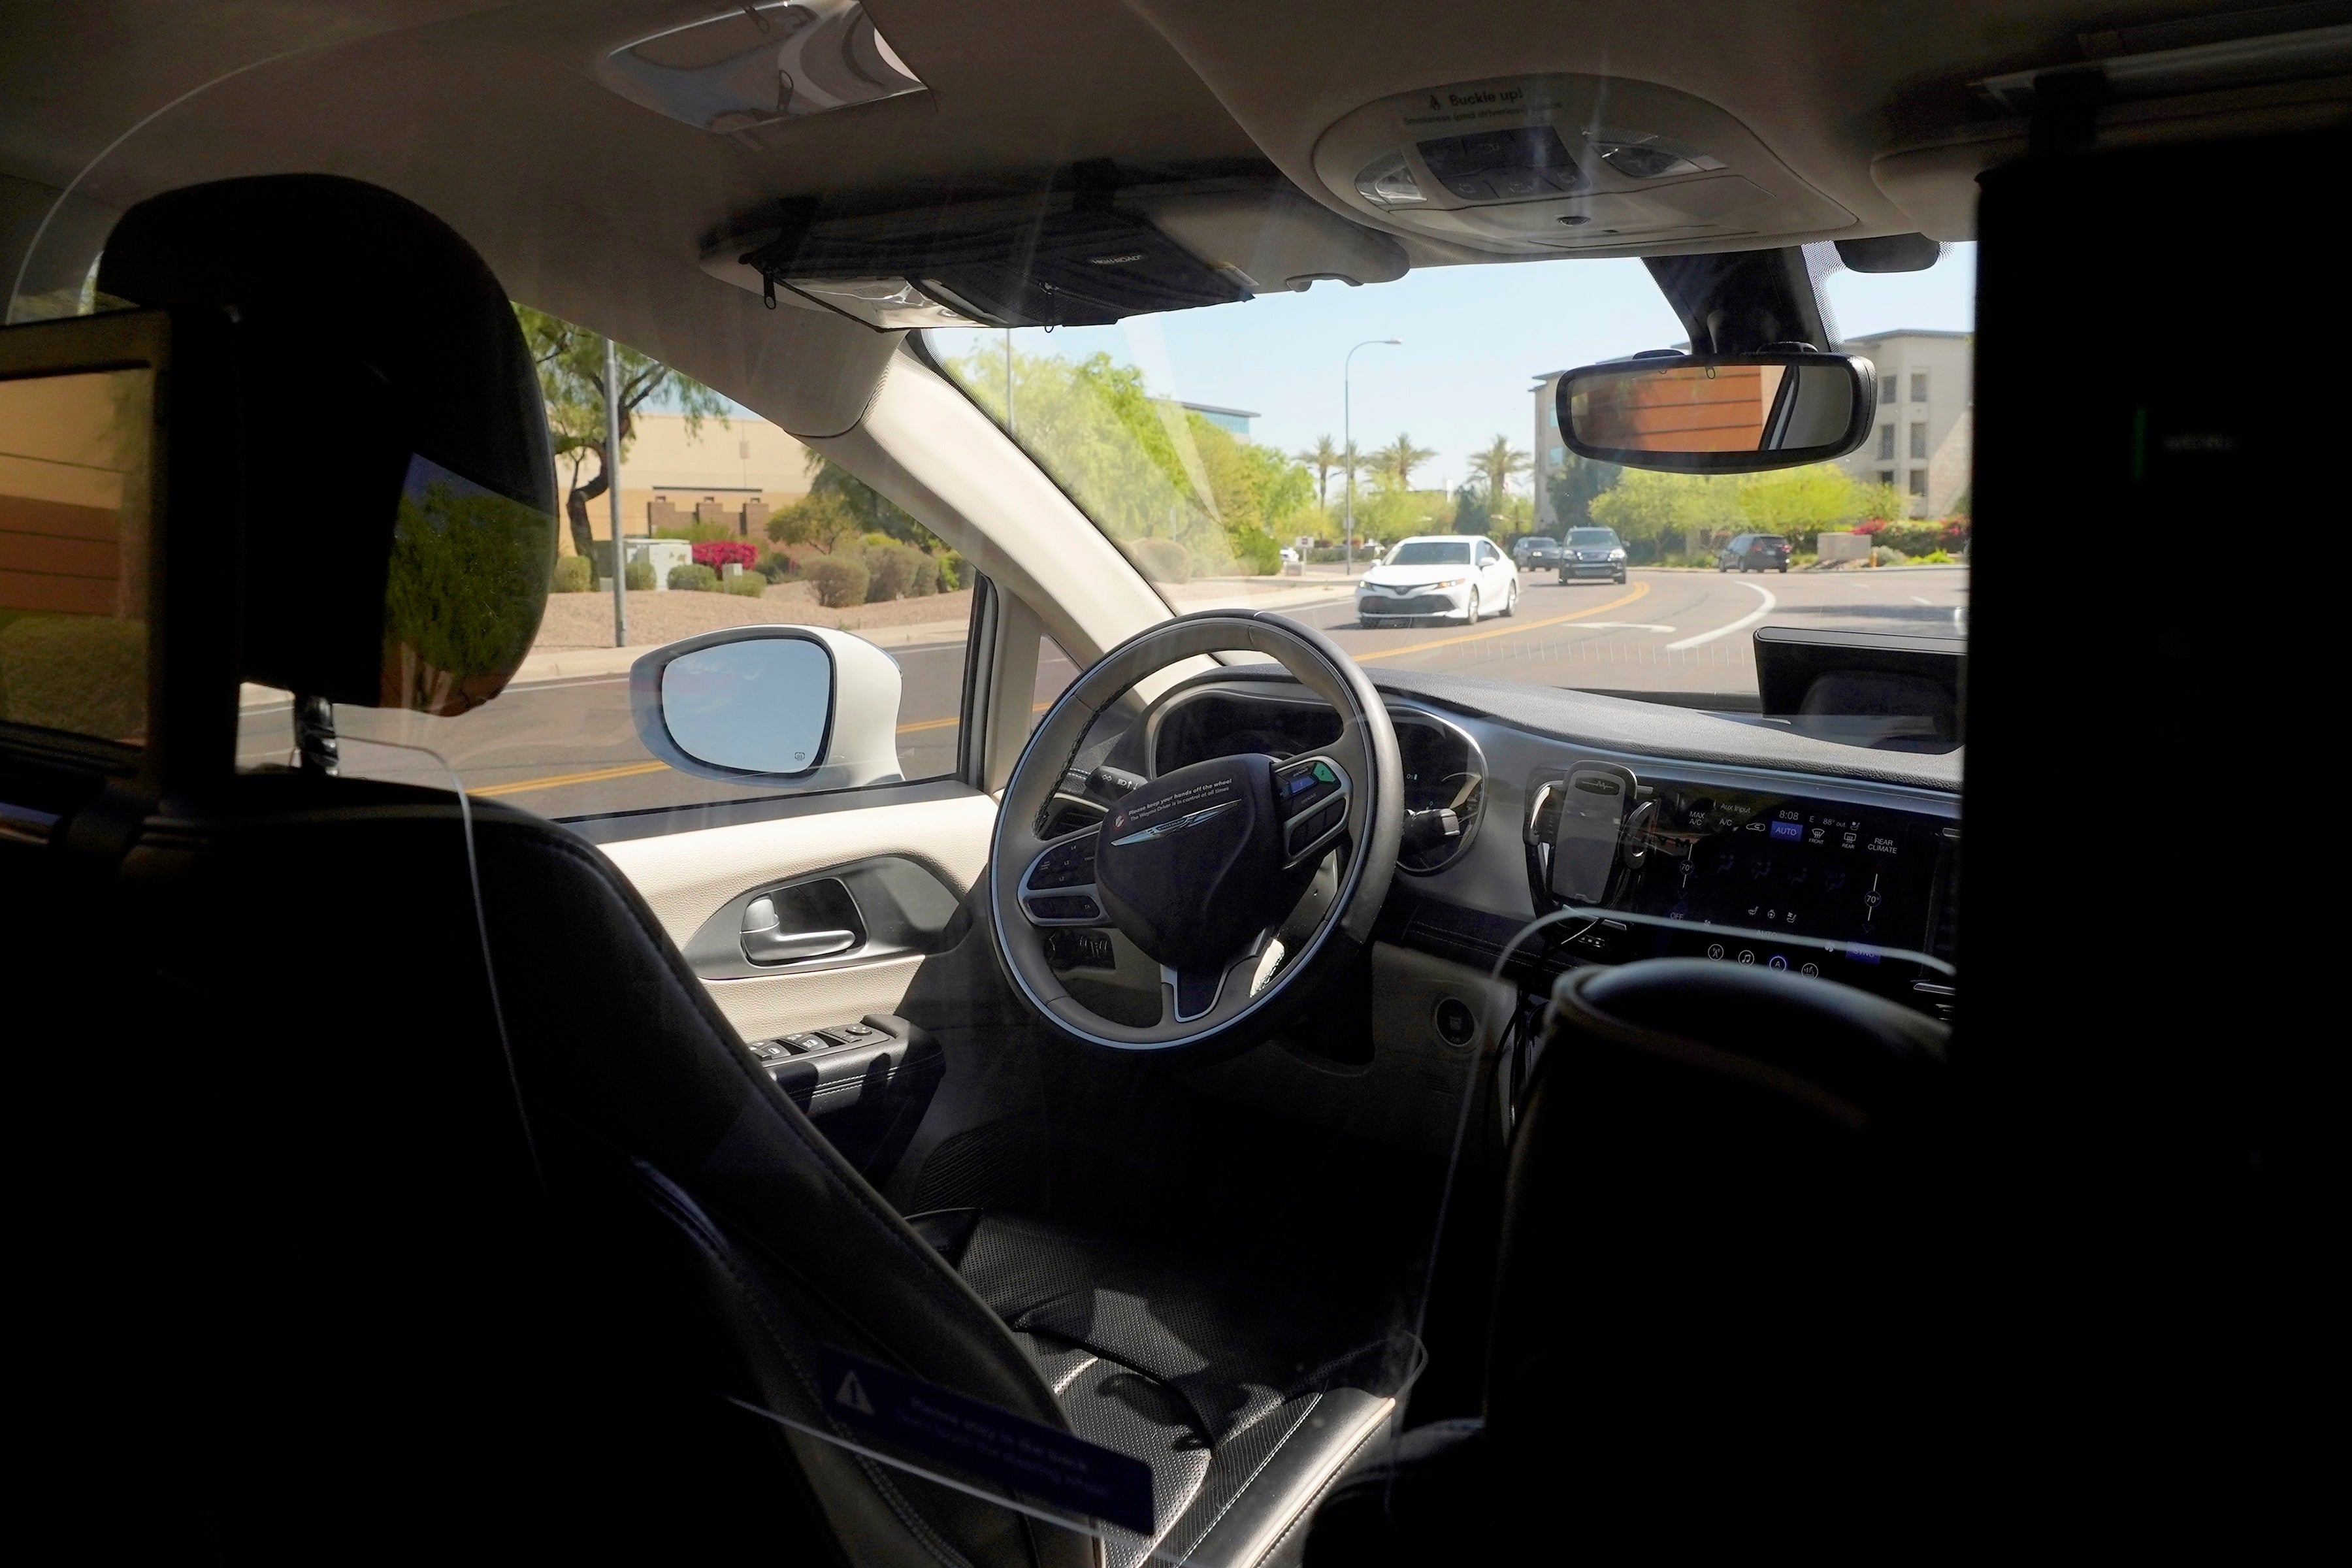 A Waymo minivan moves along a city street as an empty driver's seat and a moving steering wheel drive passengers during an autonomous vehicle ride, on April 7, 2021, in Chandler, Arizona